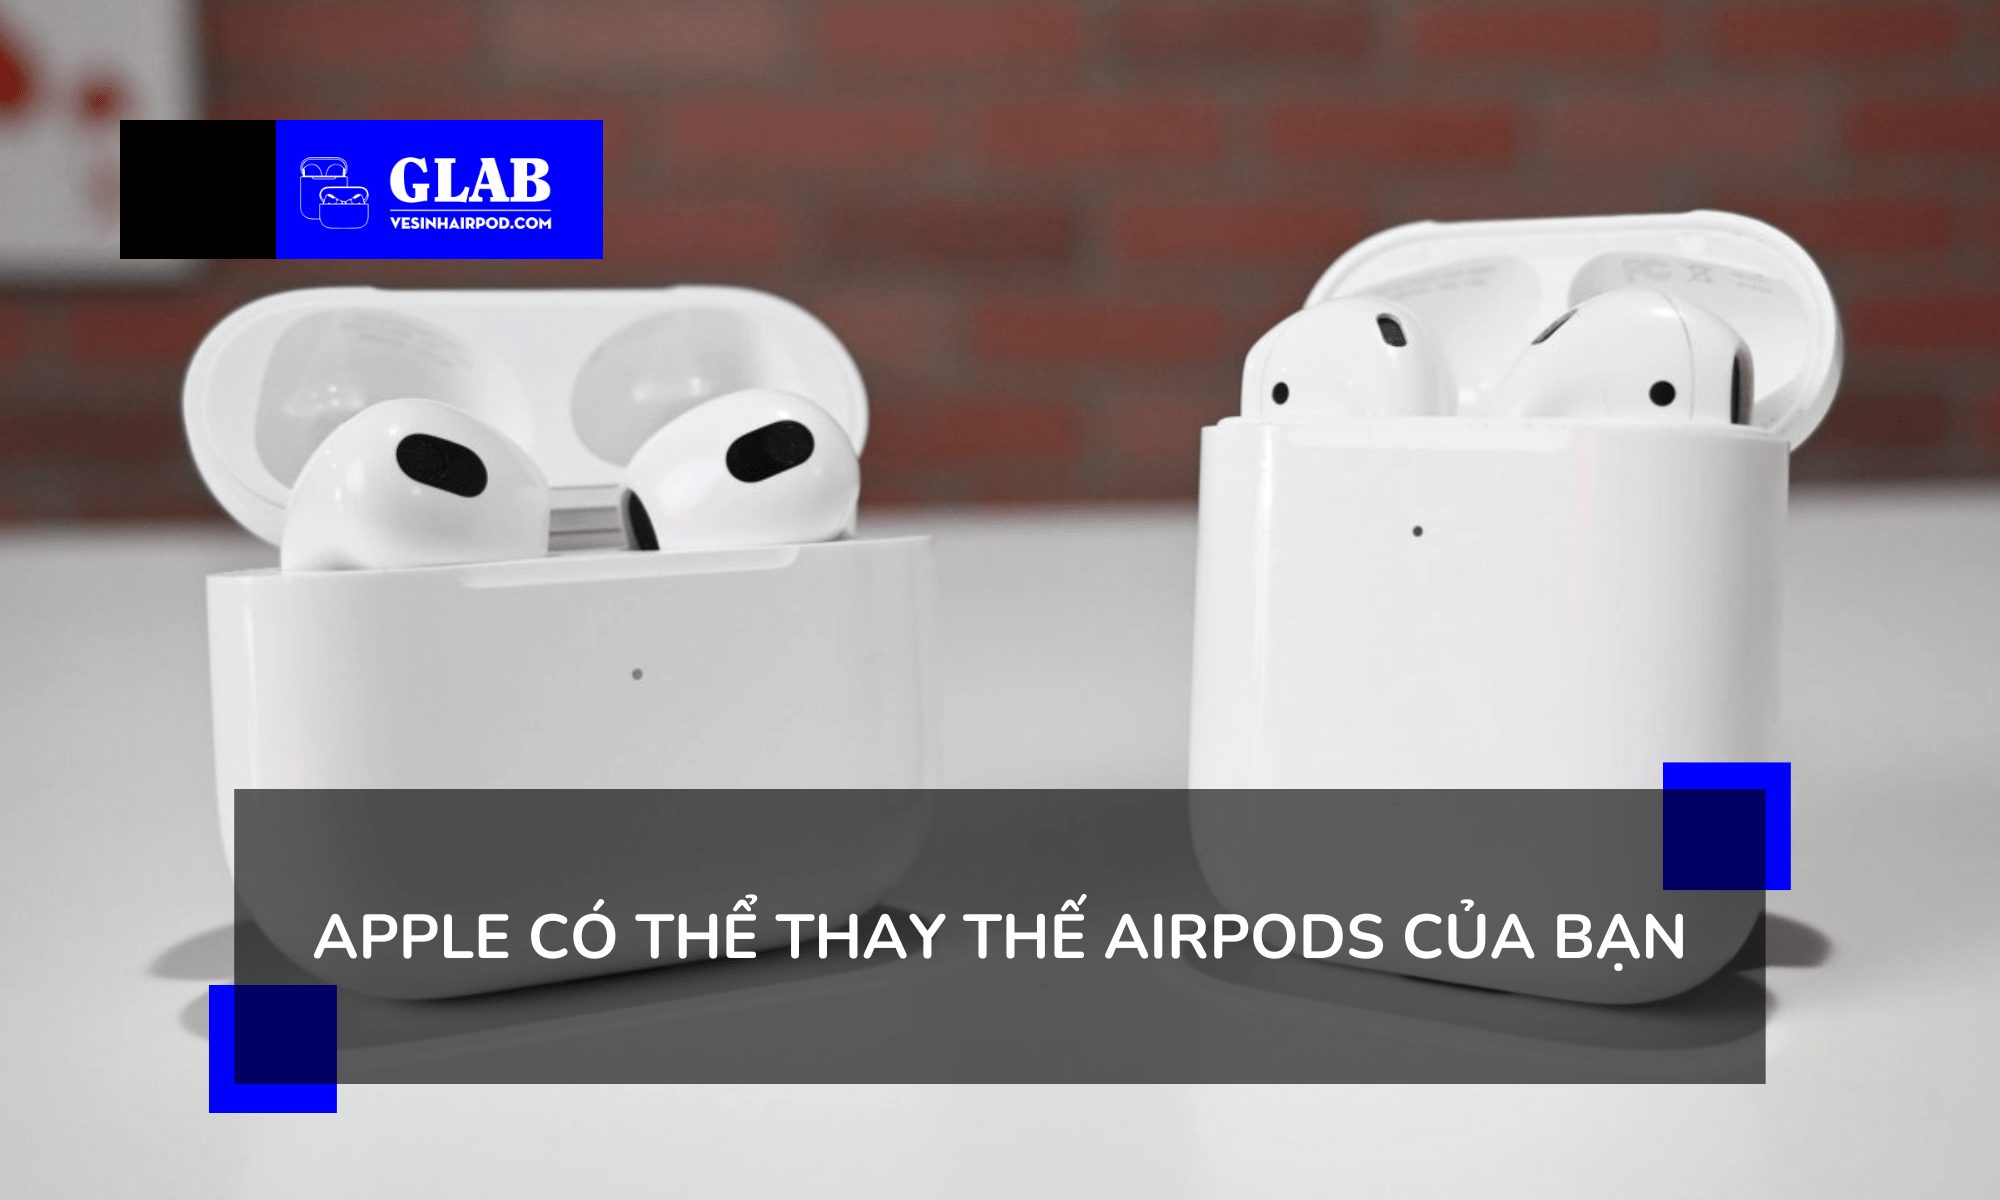 cach-thay-pin-airpods